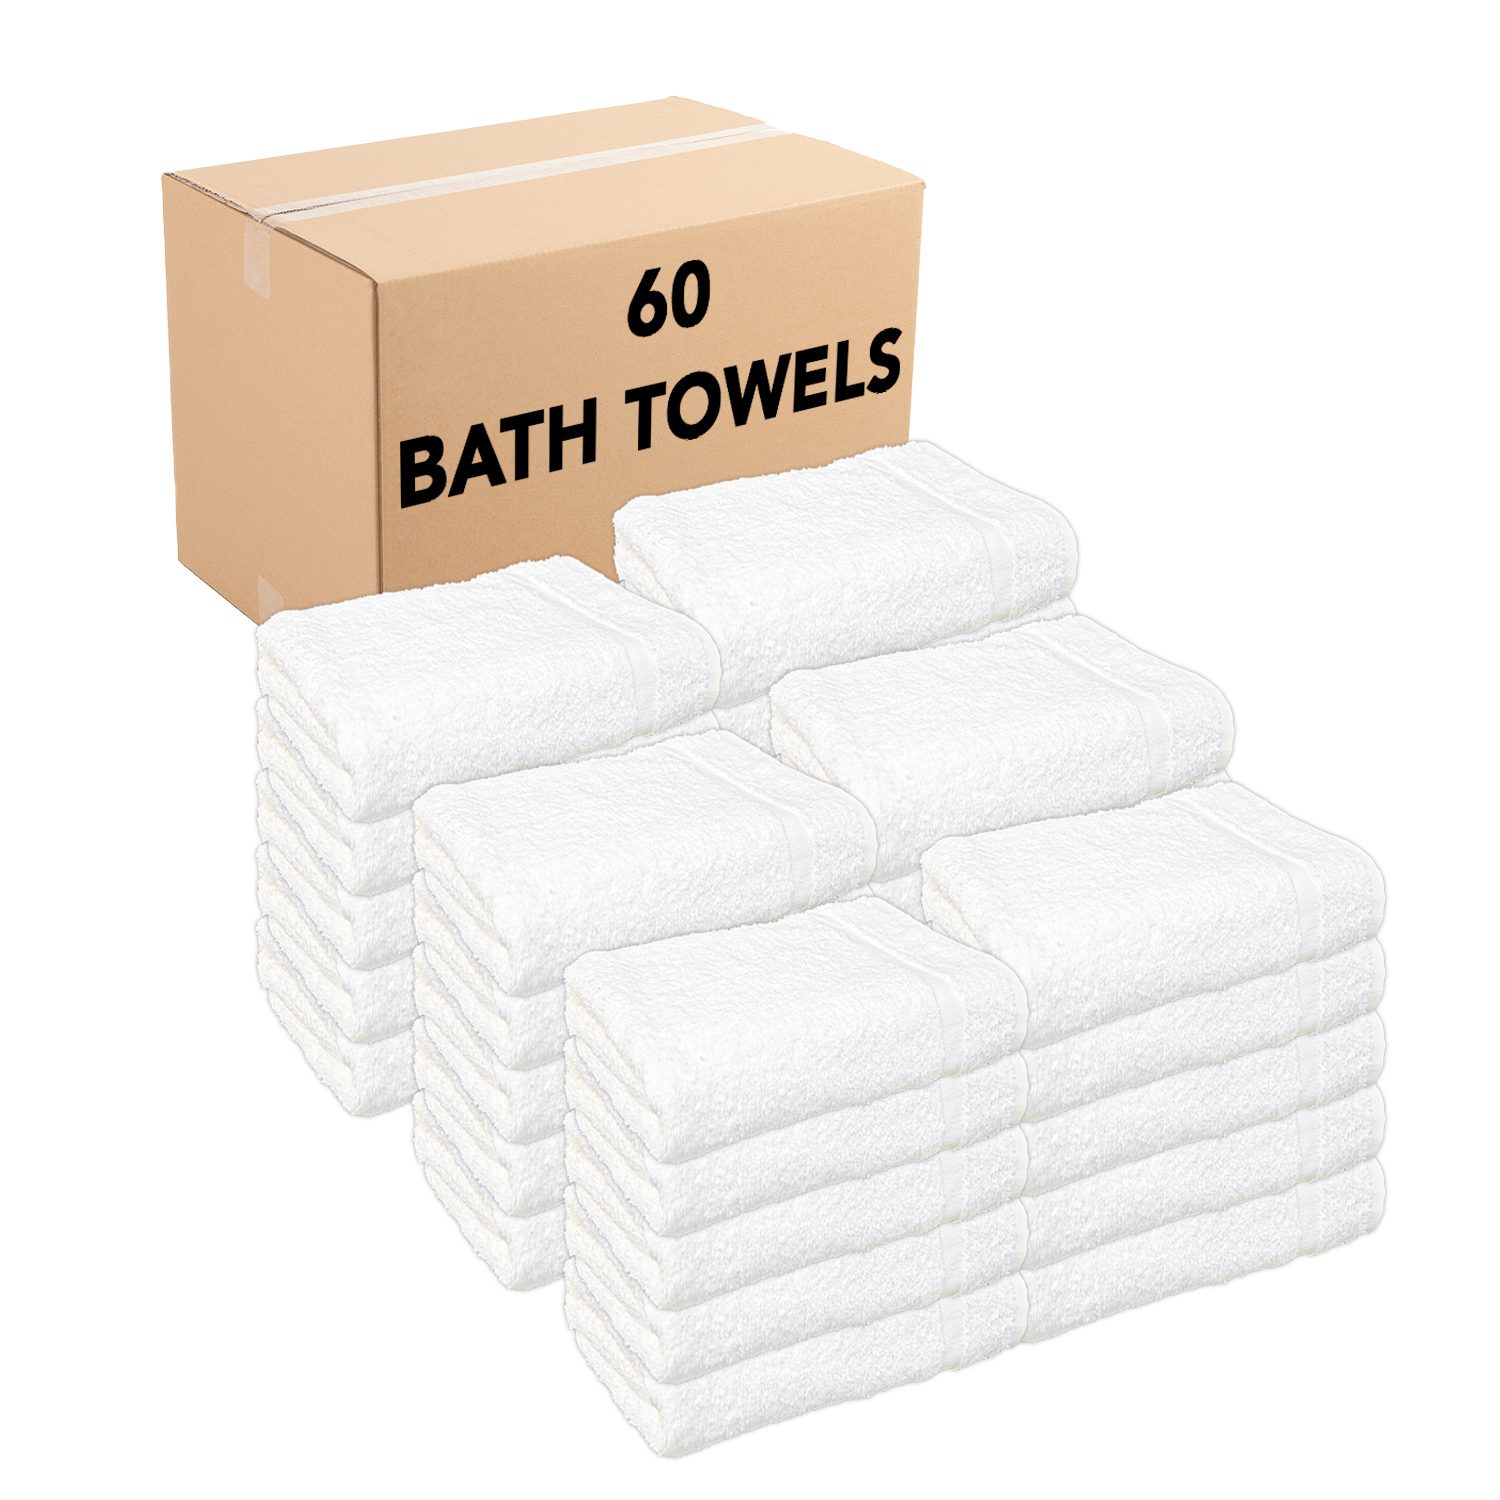 The Importance Of Buying High-Quality Hotel Pool Towels in Bulk